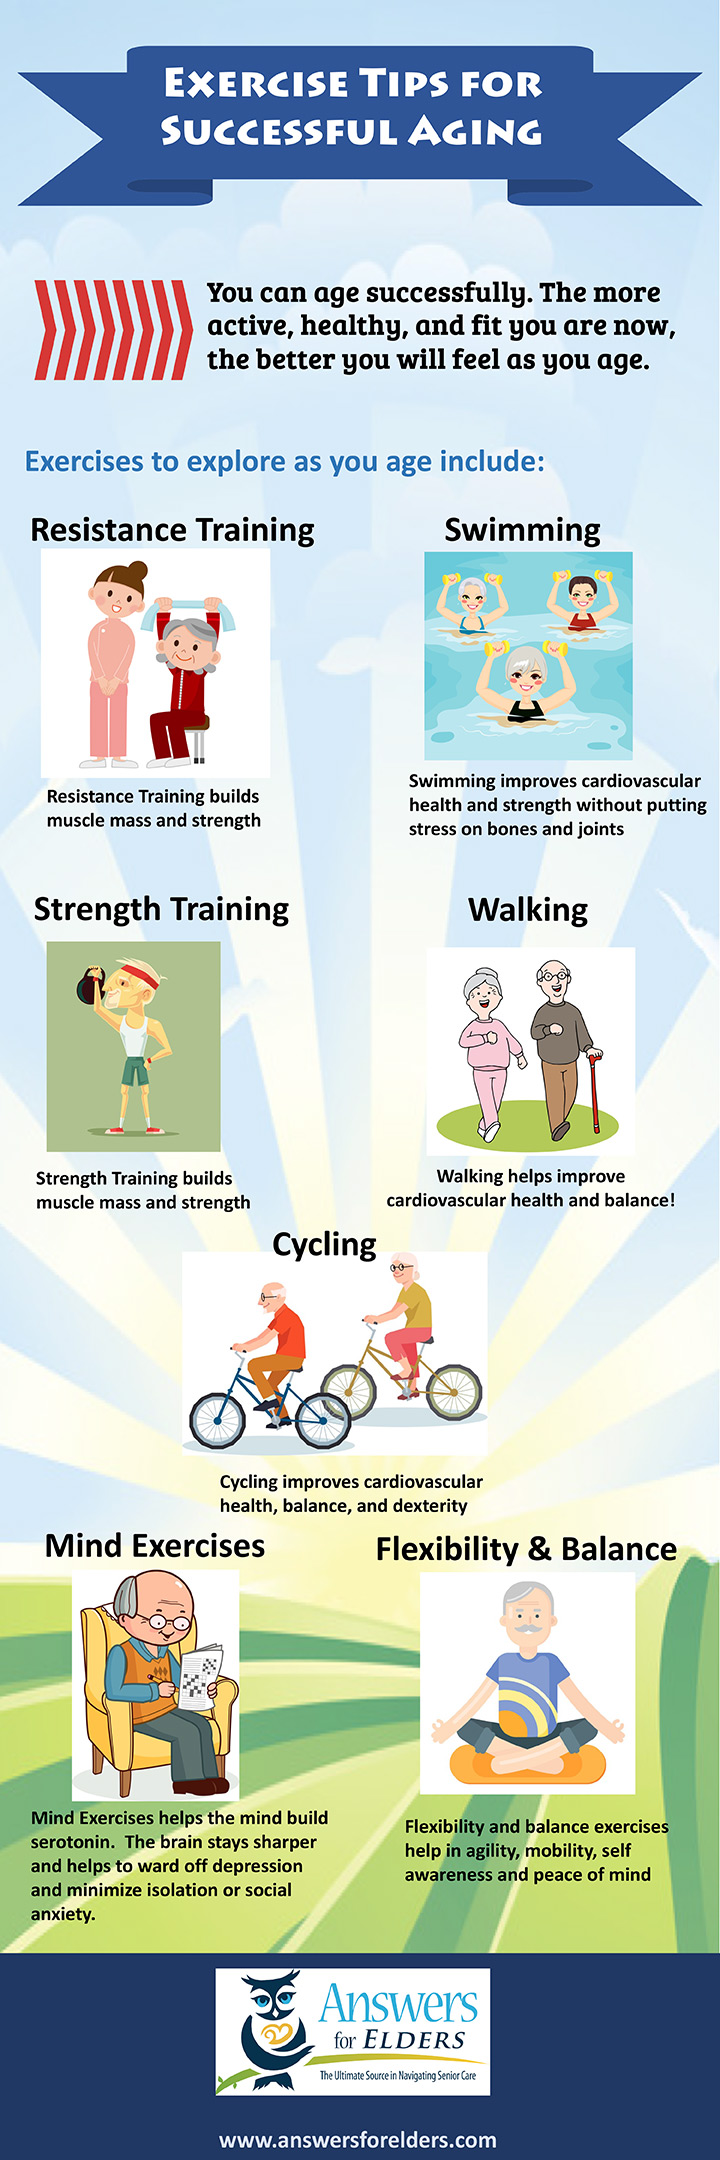 Senior Exercise and Fitness Tips 